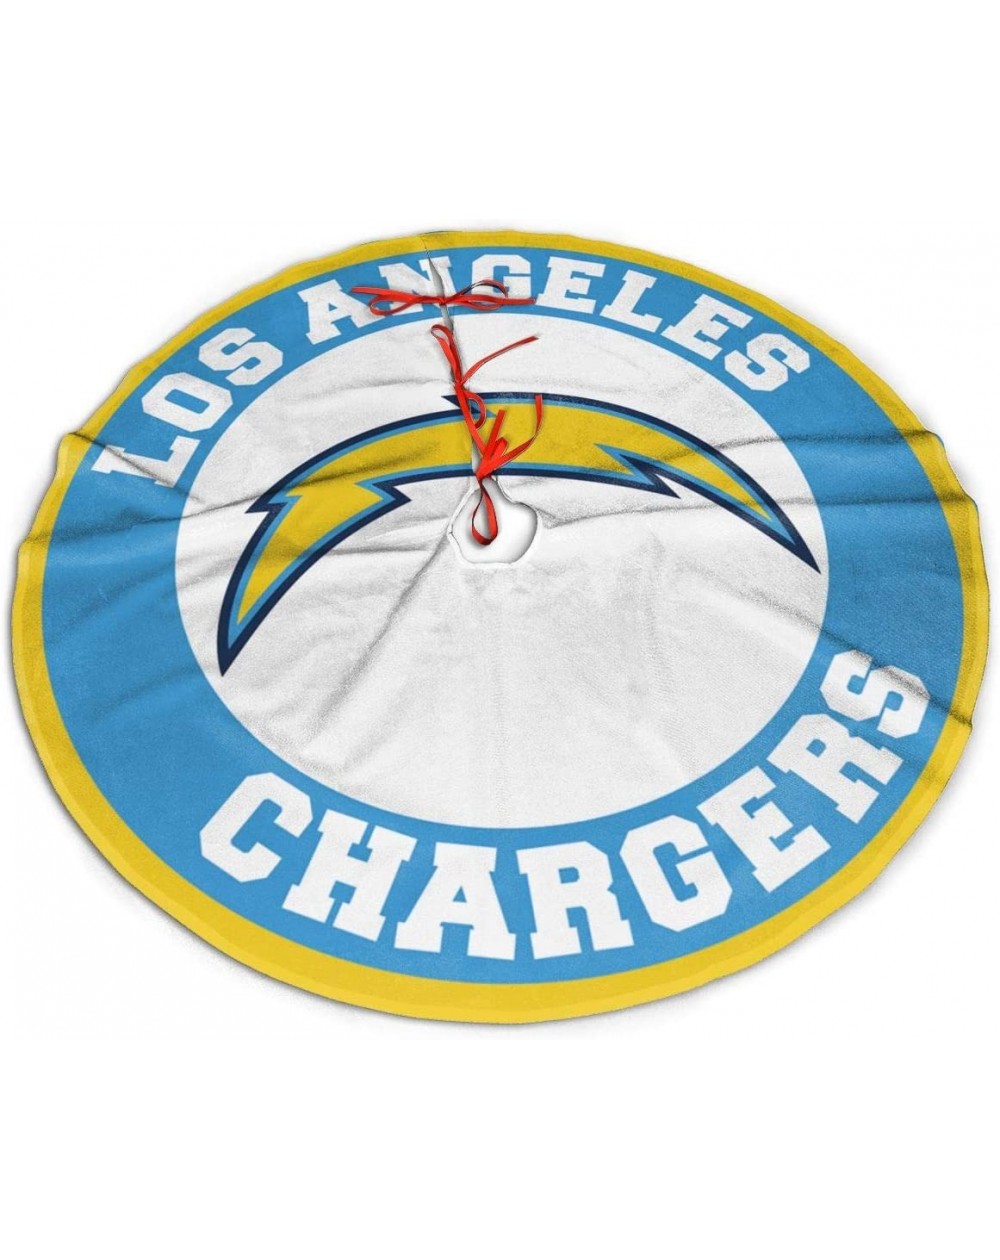 Tree Skirts Los Angeles Football Teams Fans Christmas Tree Skirt Mat Xmas Tree Skirt Holiday Party Decoration - Chargers - C6...